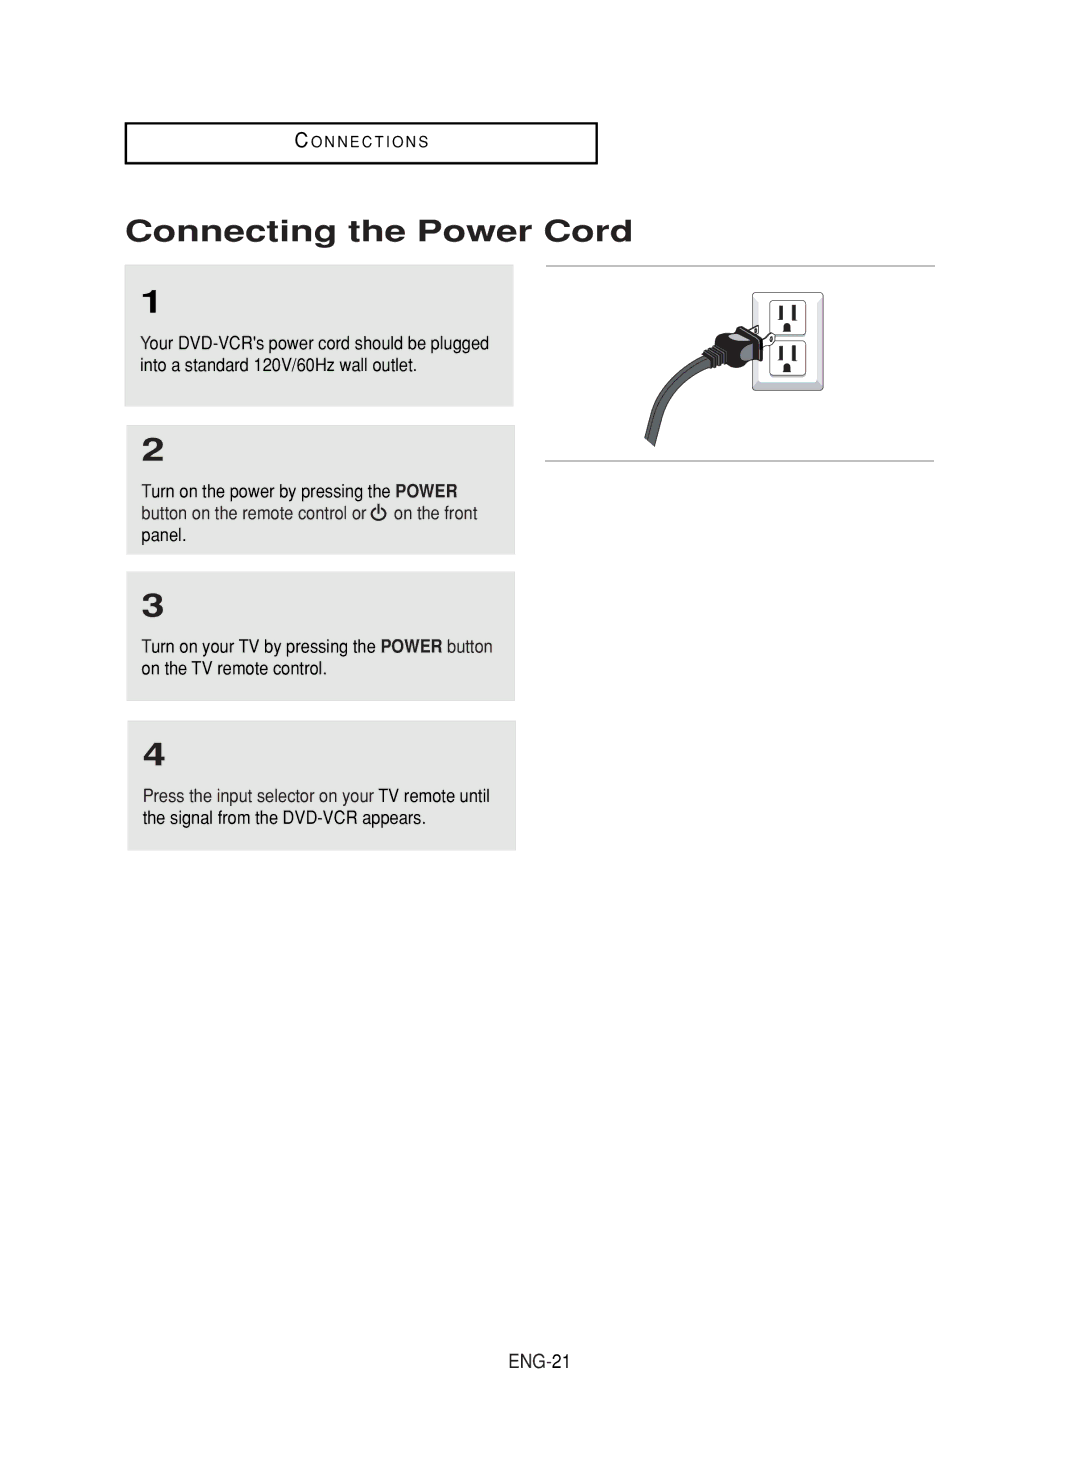 Samsung DVD-V9800 instruction manual Connecting the Power Cord, ENG-21 